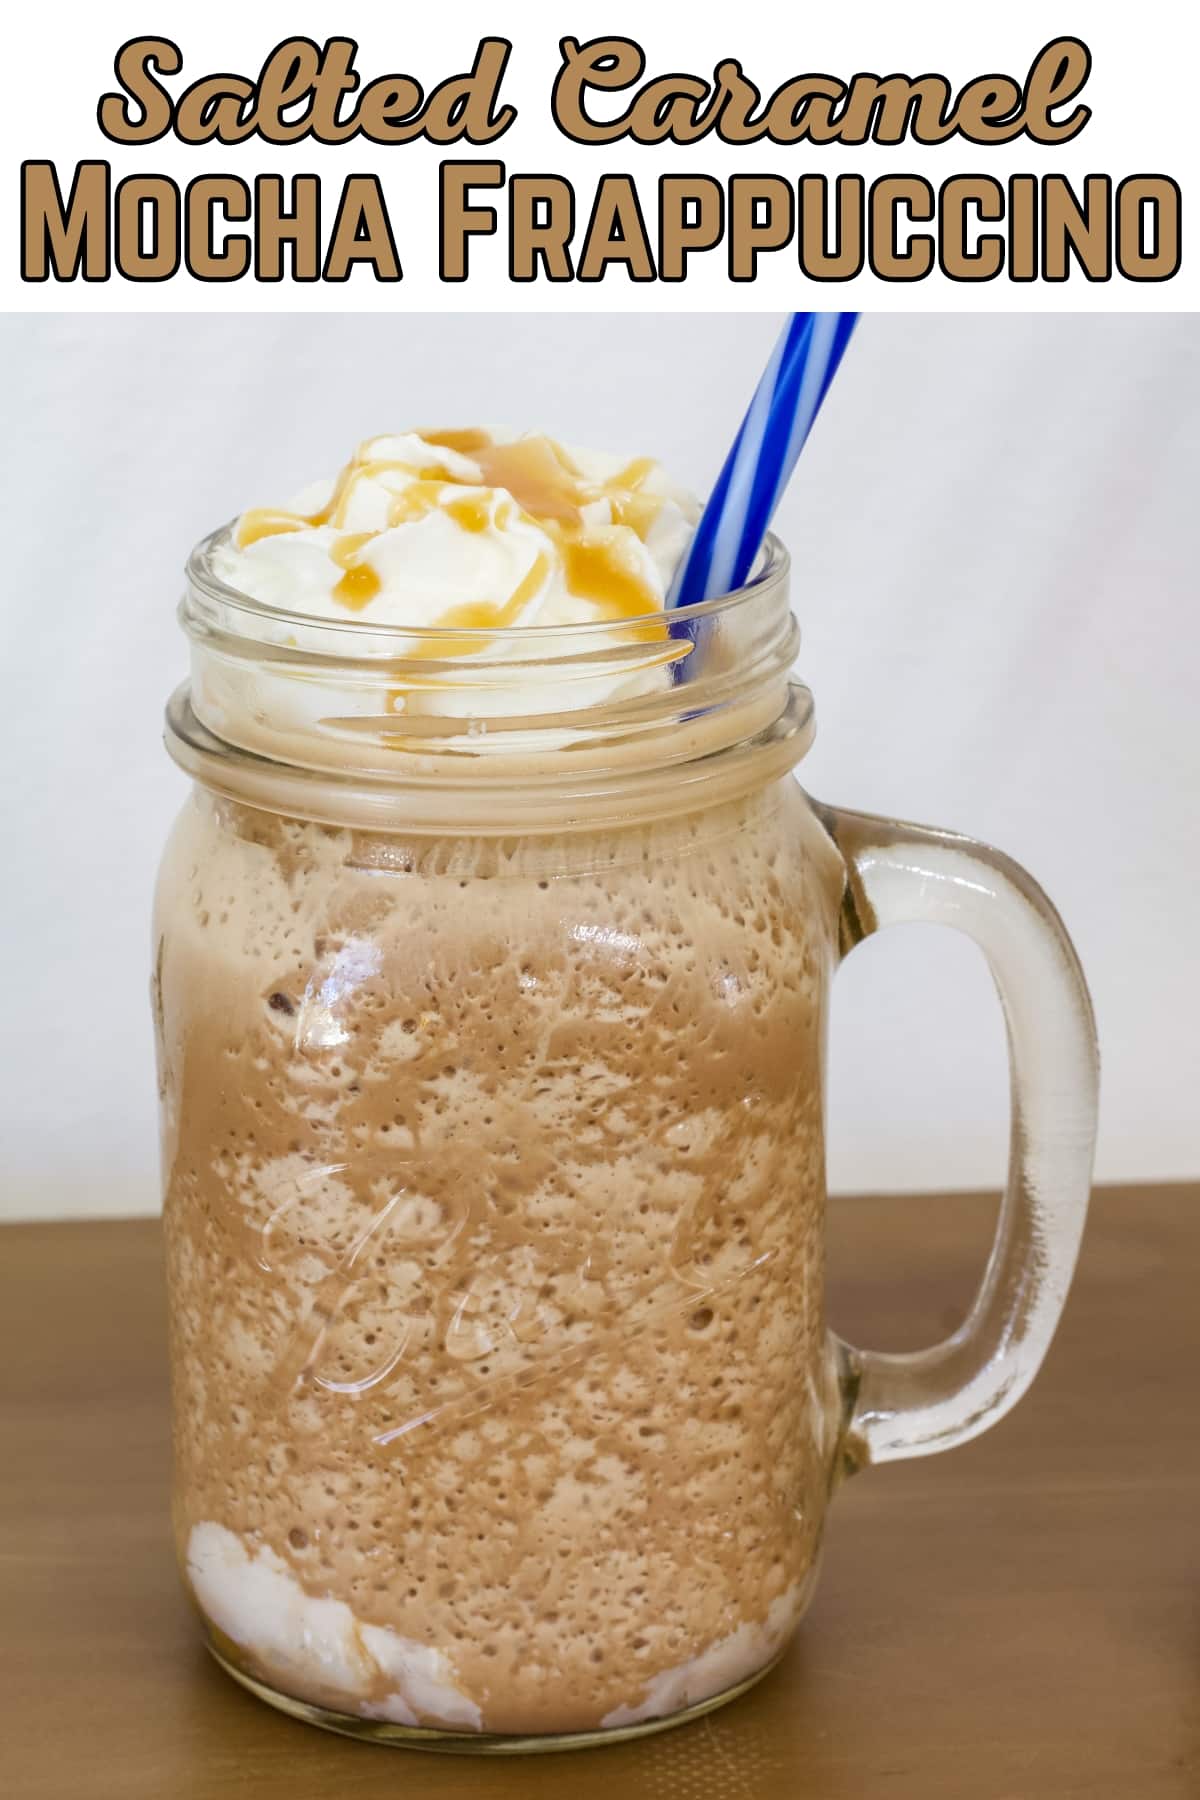 Make your own copycat Starbucks Salted Caramel Mocha Frappuccino with this simple recipe. Find out the ingredients and instructions now! via @mindyscookingobsession